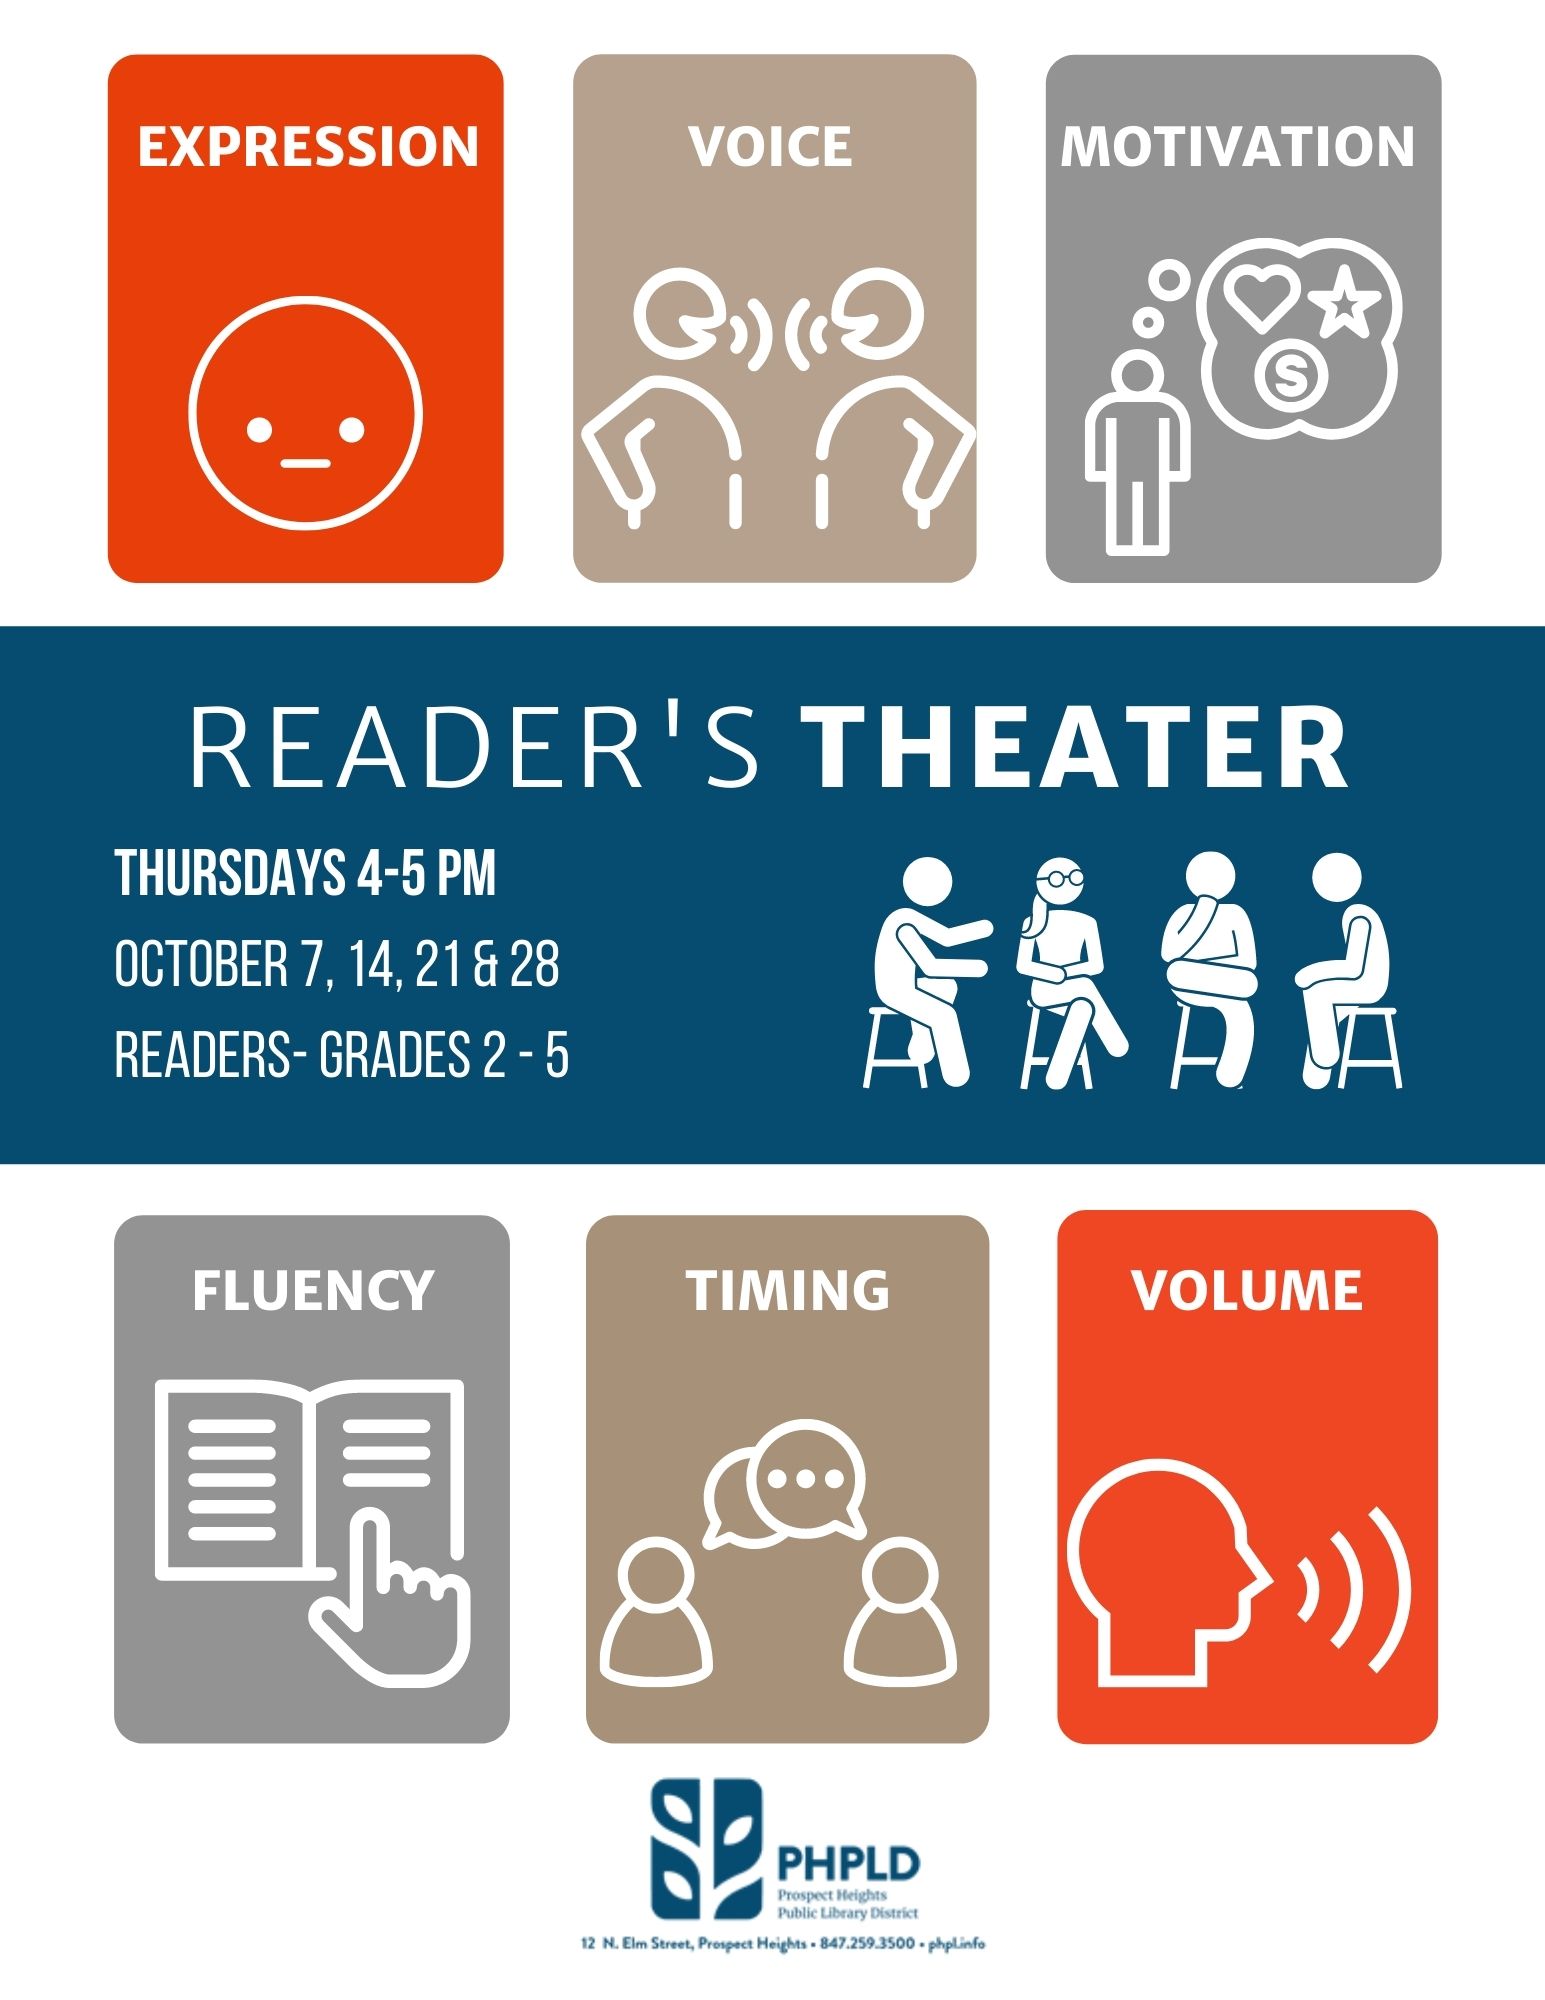 Reader's Theater Flyer- Expression/Voice/Motivation/Fluency/Timing/Volume